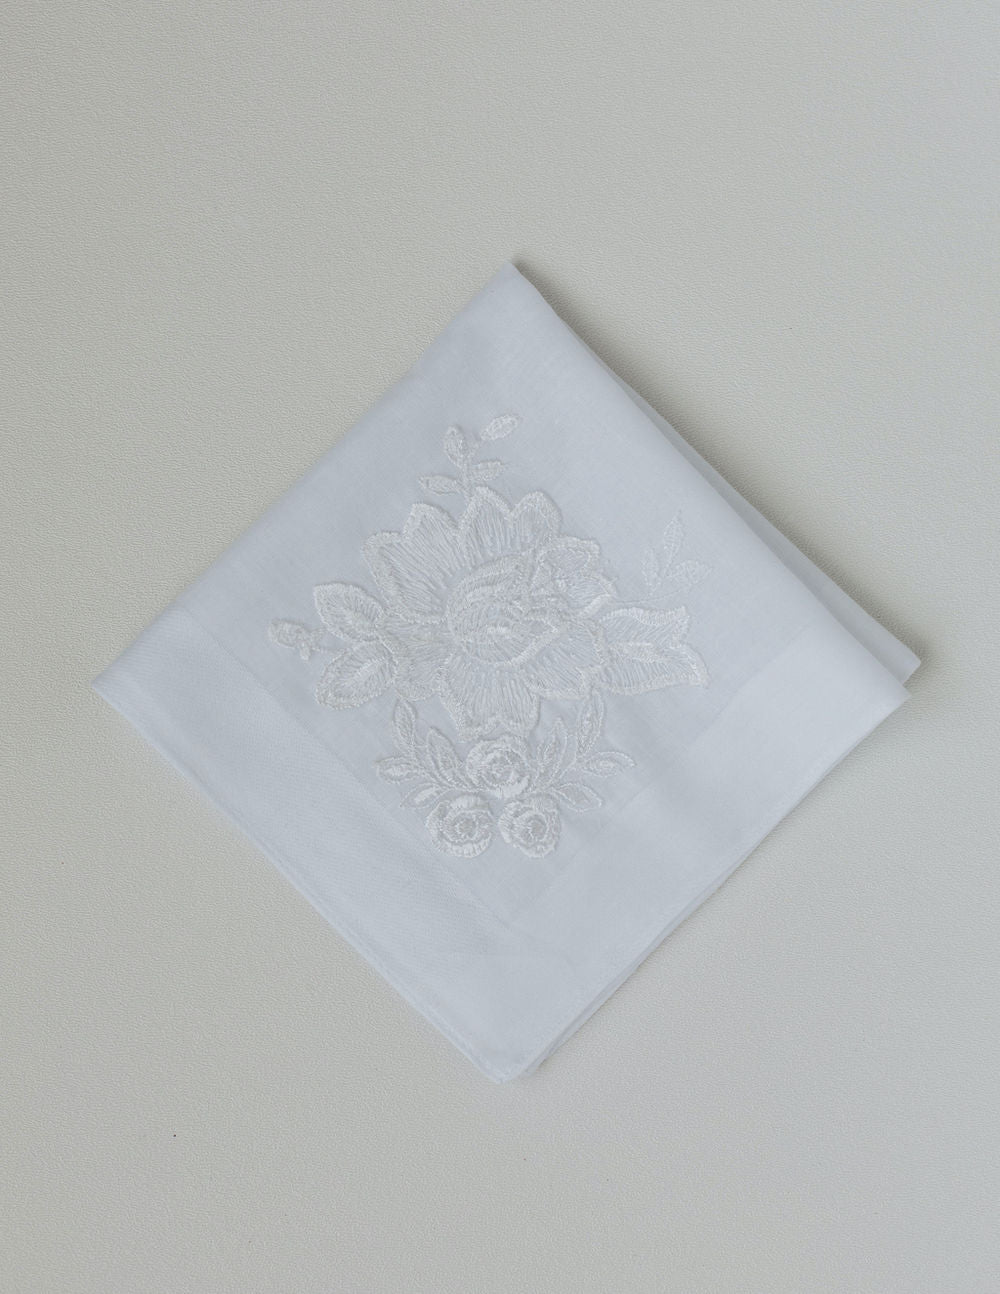 handkerchief made with lace from mothers wedding dress by The-Garter-Girl